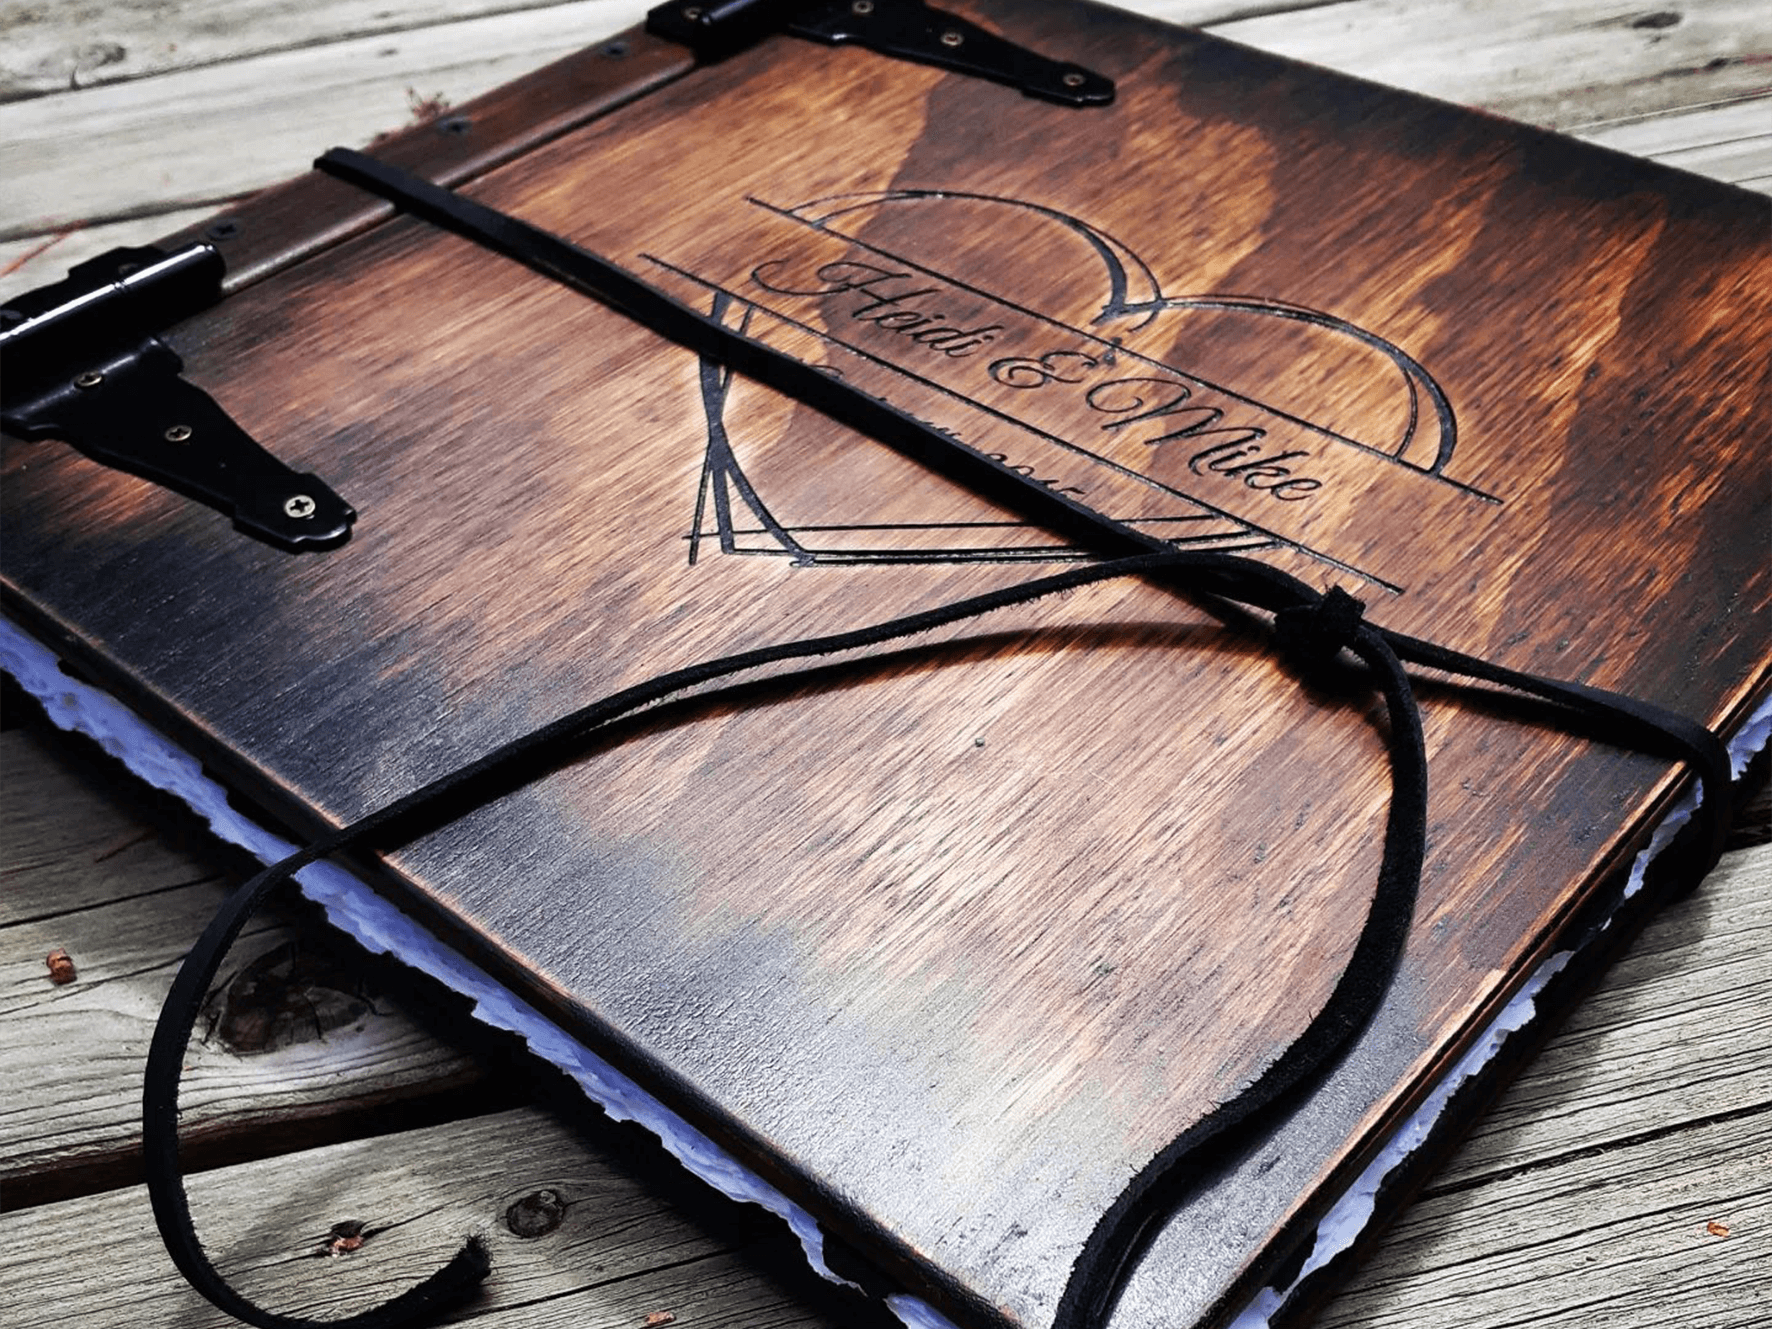 Wedding Anniversary Memory Book - Engraved fifth wedding anniversary photo album gift, handcrafted by Tylir Wisdom at Rustic Engravings | Commemorate your special moments with this exquisite anniversary book finely crafted with a wood and top grain leathe